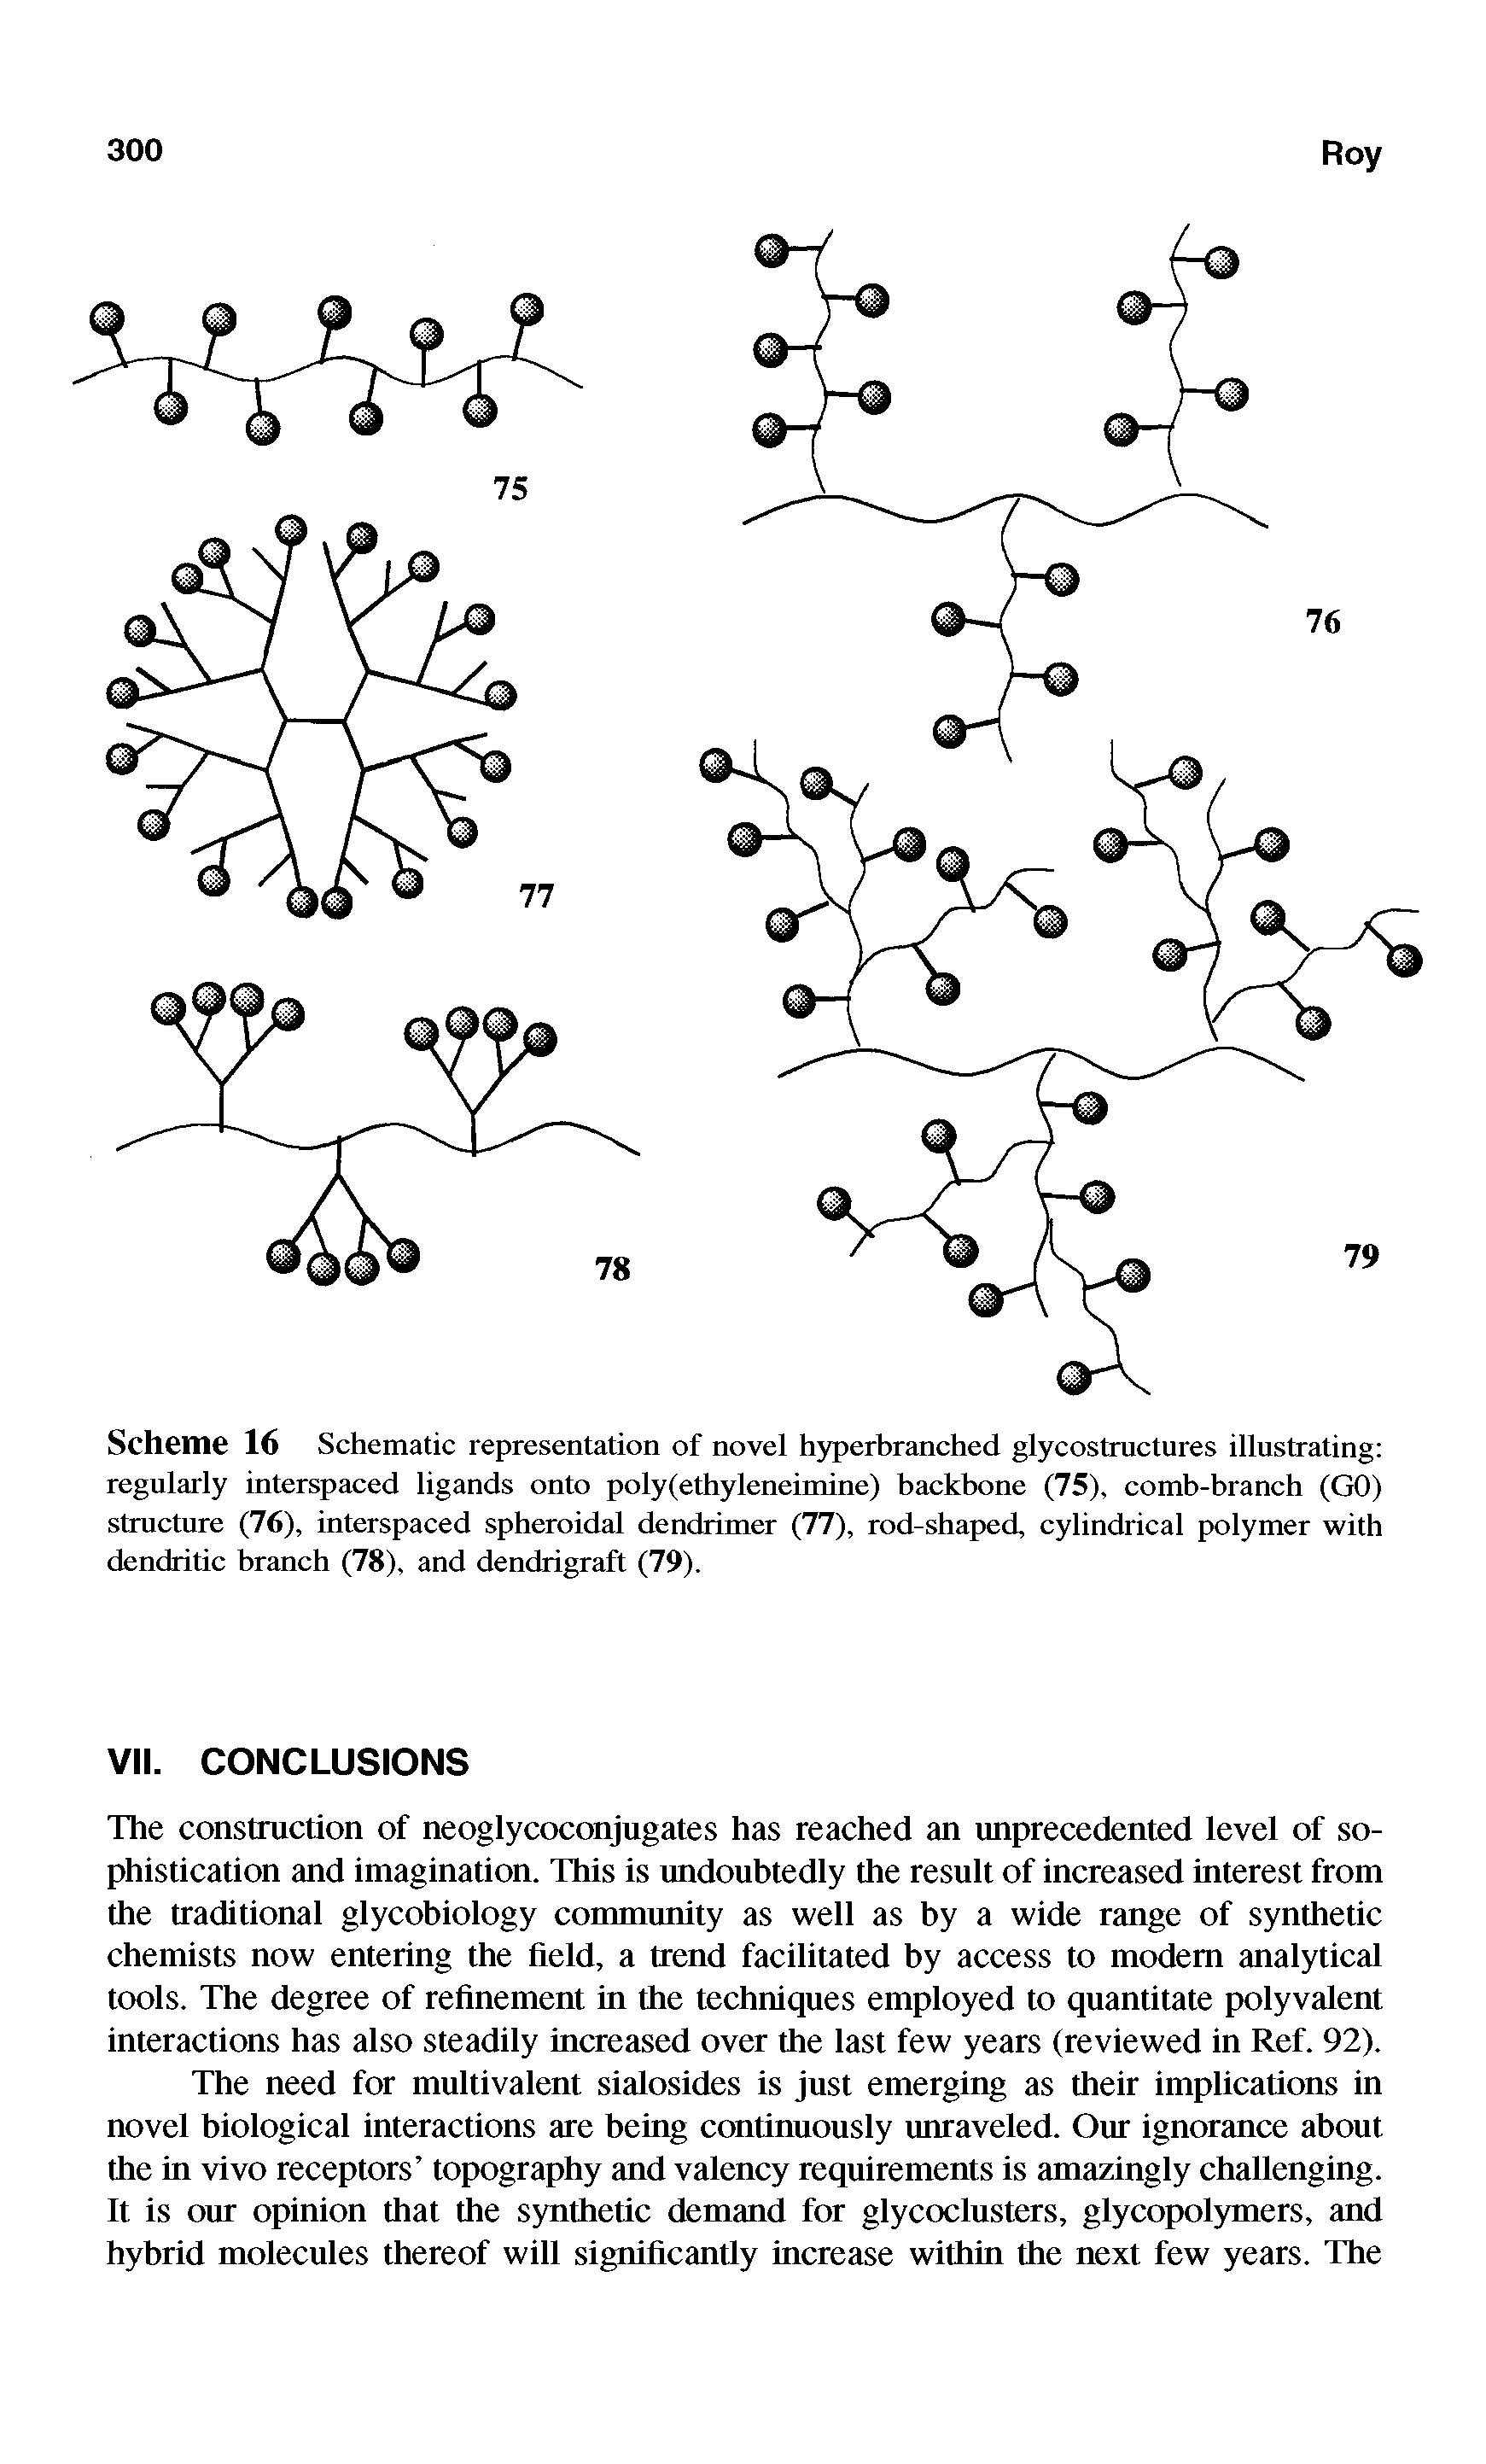 Scheme 16 Schematic representation of novel hyperbranched glycostructures illustrating regularly interspaced ligands onto poly(ethyleneimine) backbone (75), comb-branch (GO) structure (76), interspaced spheroidal dendrimer (77), rod-shaped, cylindrical polymer with dendritic branch (78), and dendrigraft (79).